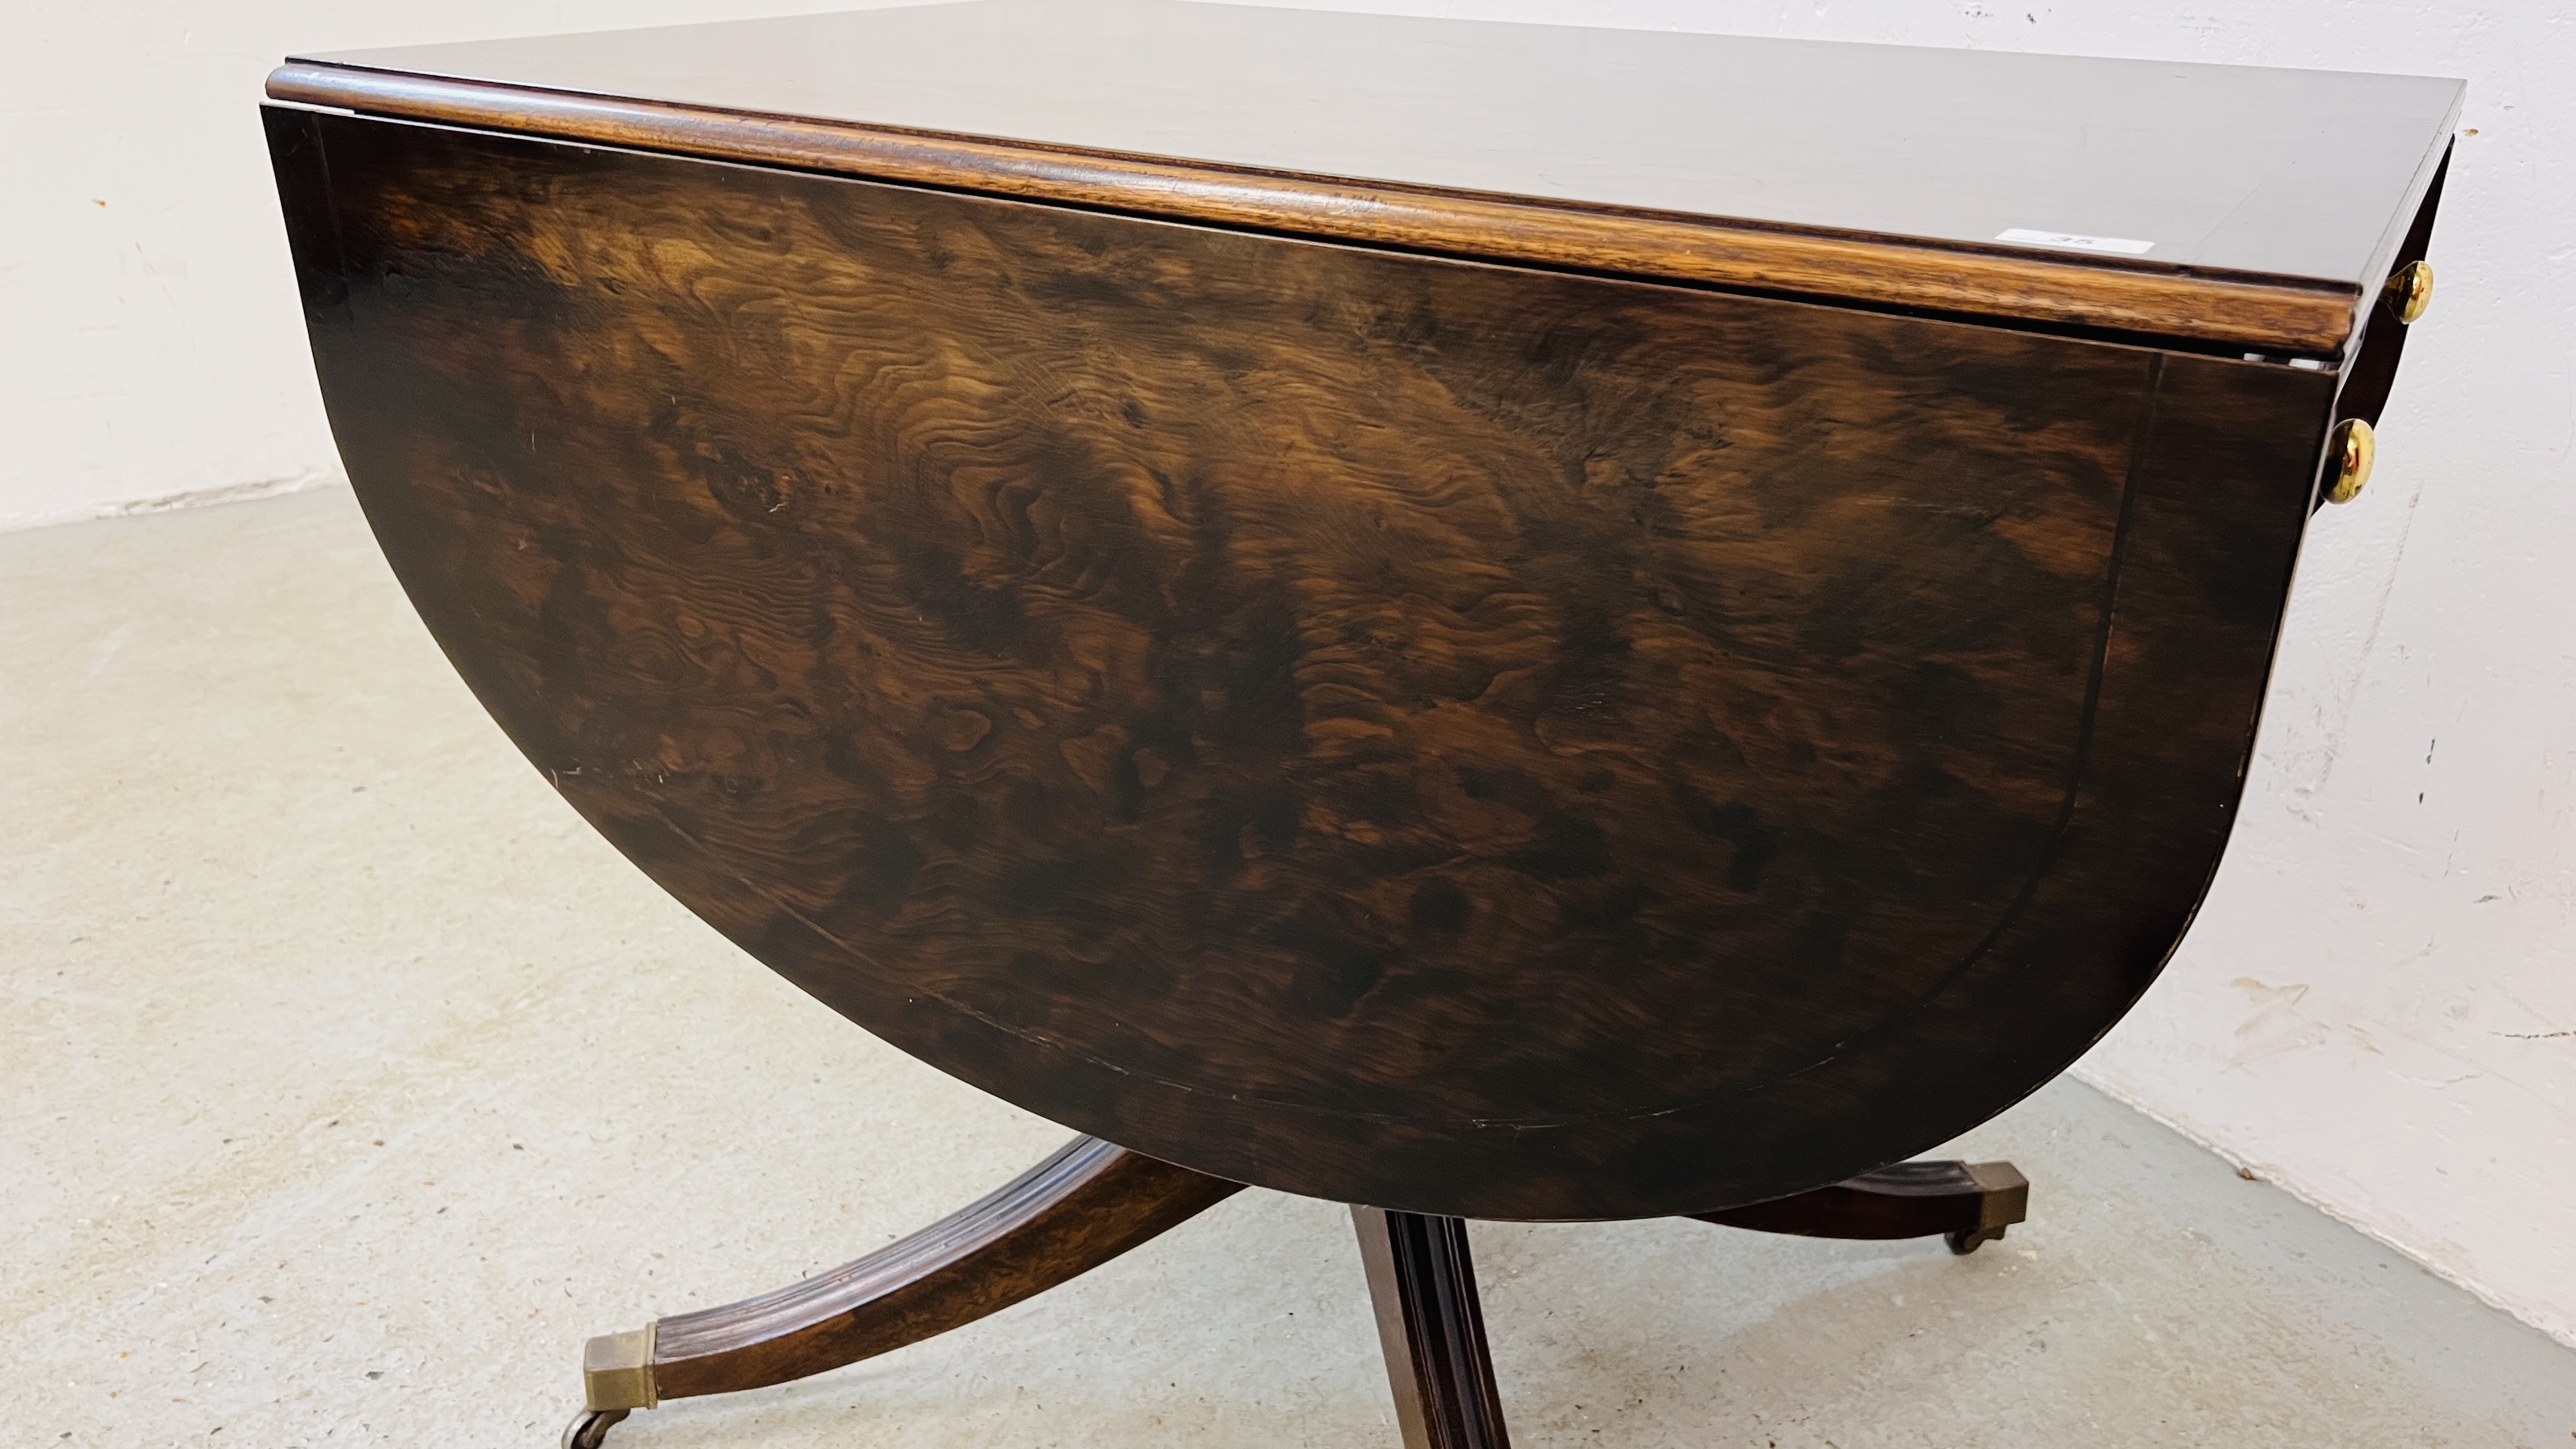 A REGENCY STYLE MAHOGANY PEDESTAL TABLE WITH DROP LEAVES AND SINGLE DRAWER. - Image 3 of 10